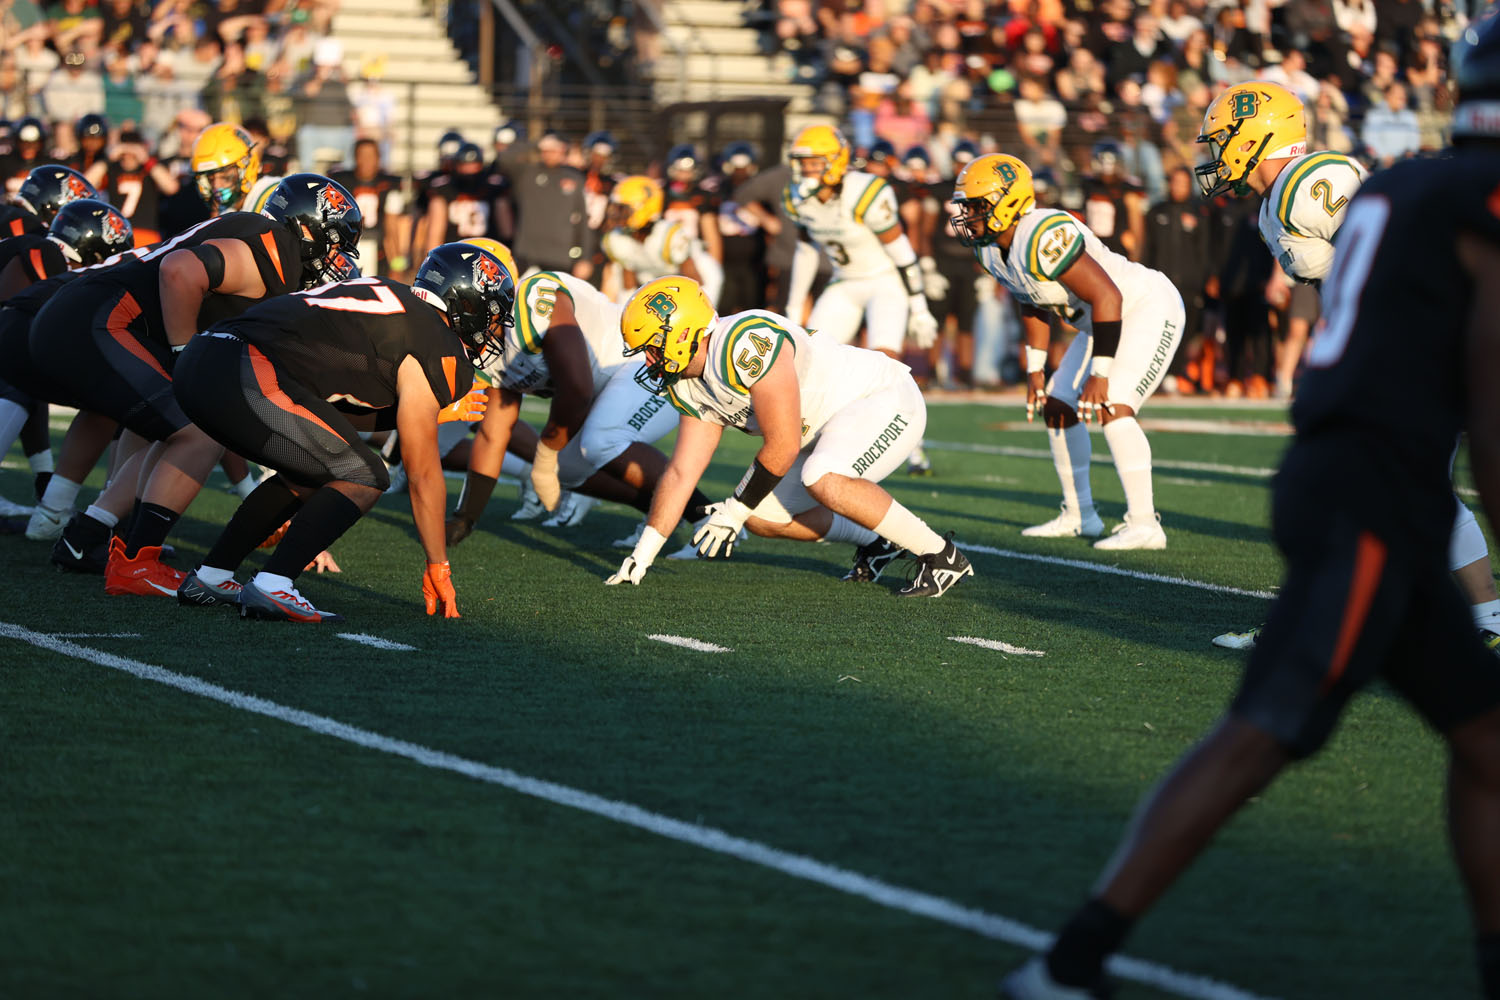 Brockport defense ready and set for the play